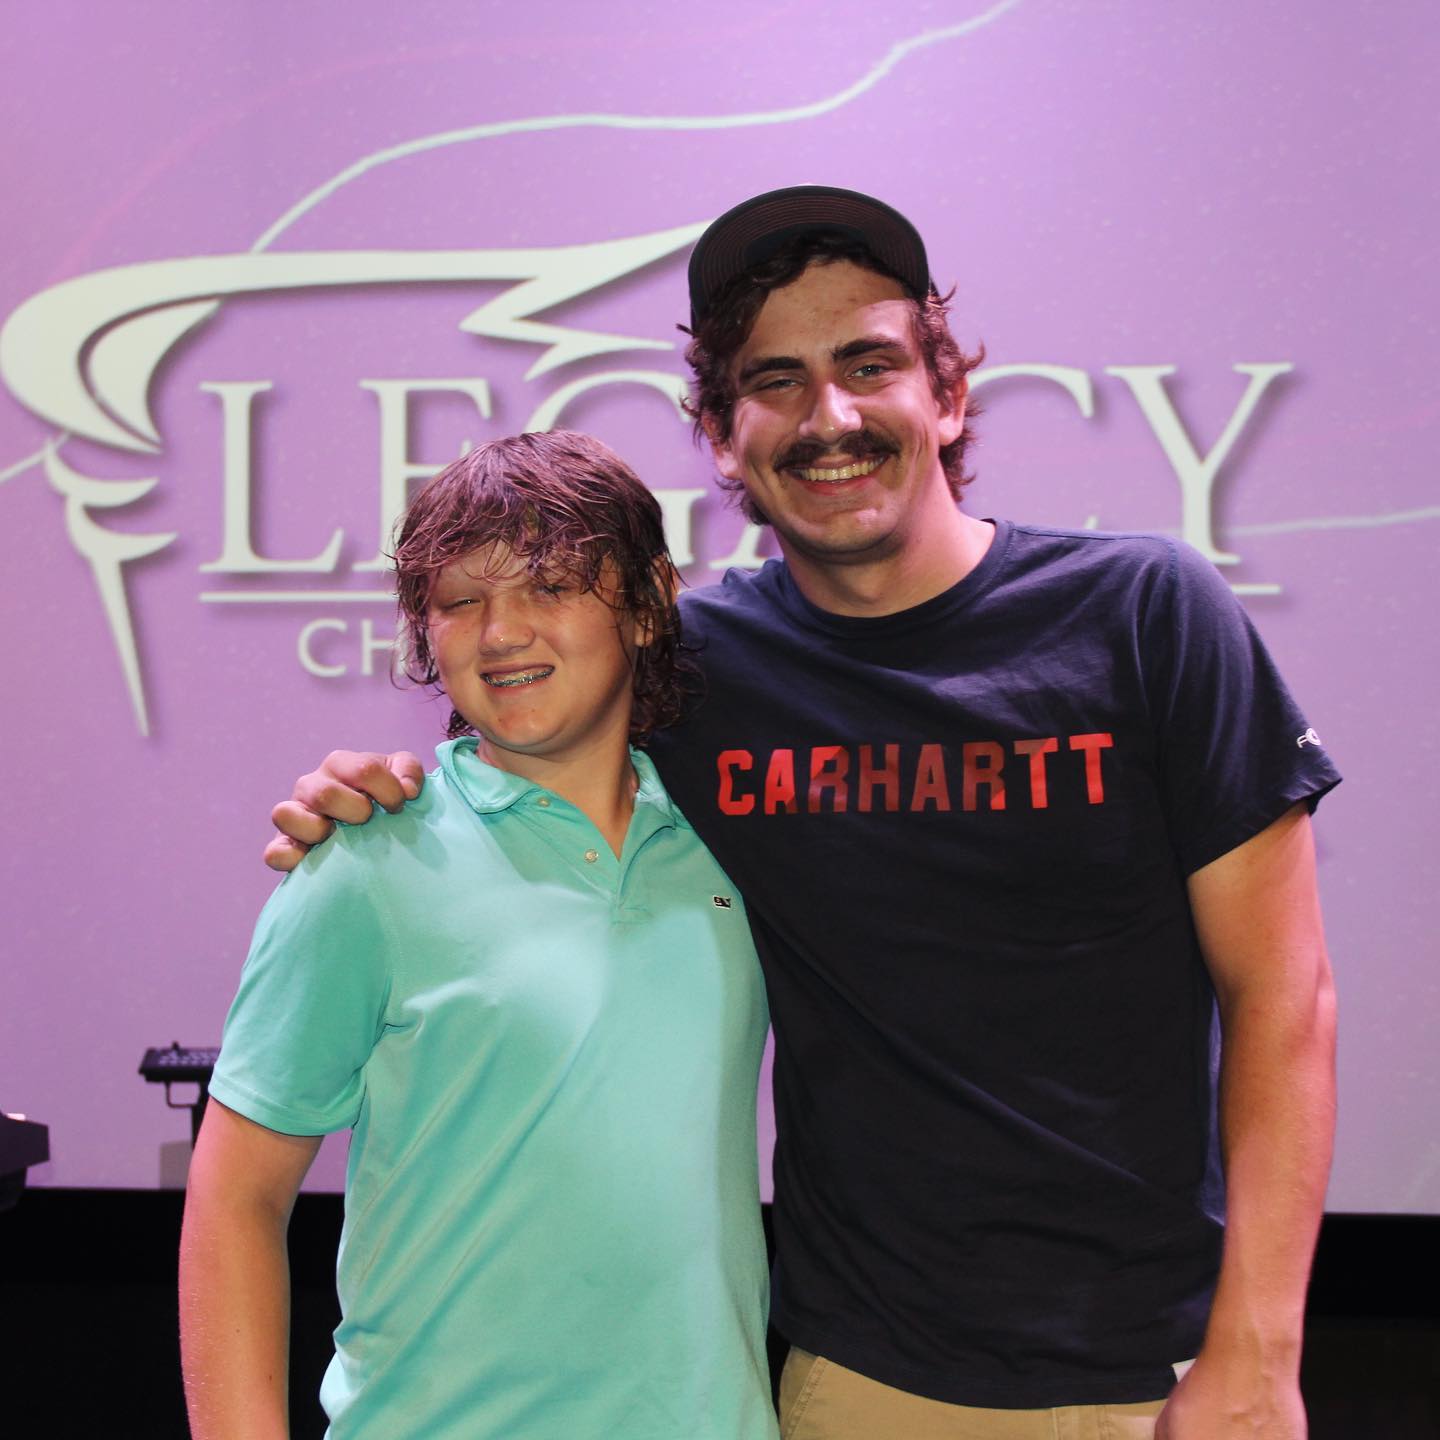 Legacy’s mission is to make disciples (who make disciples 😉)! We’re celebrating Braedyn who went all in with his faith this weekend and got baptized! 🥳